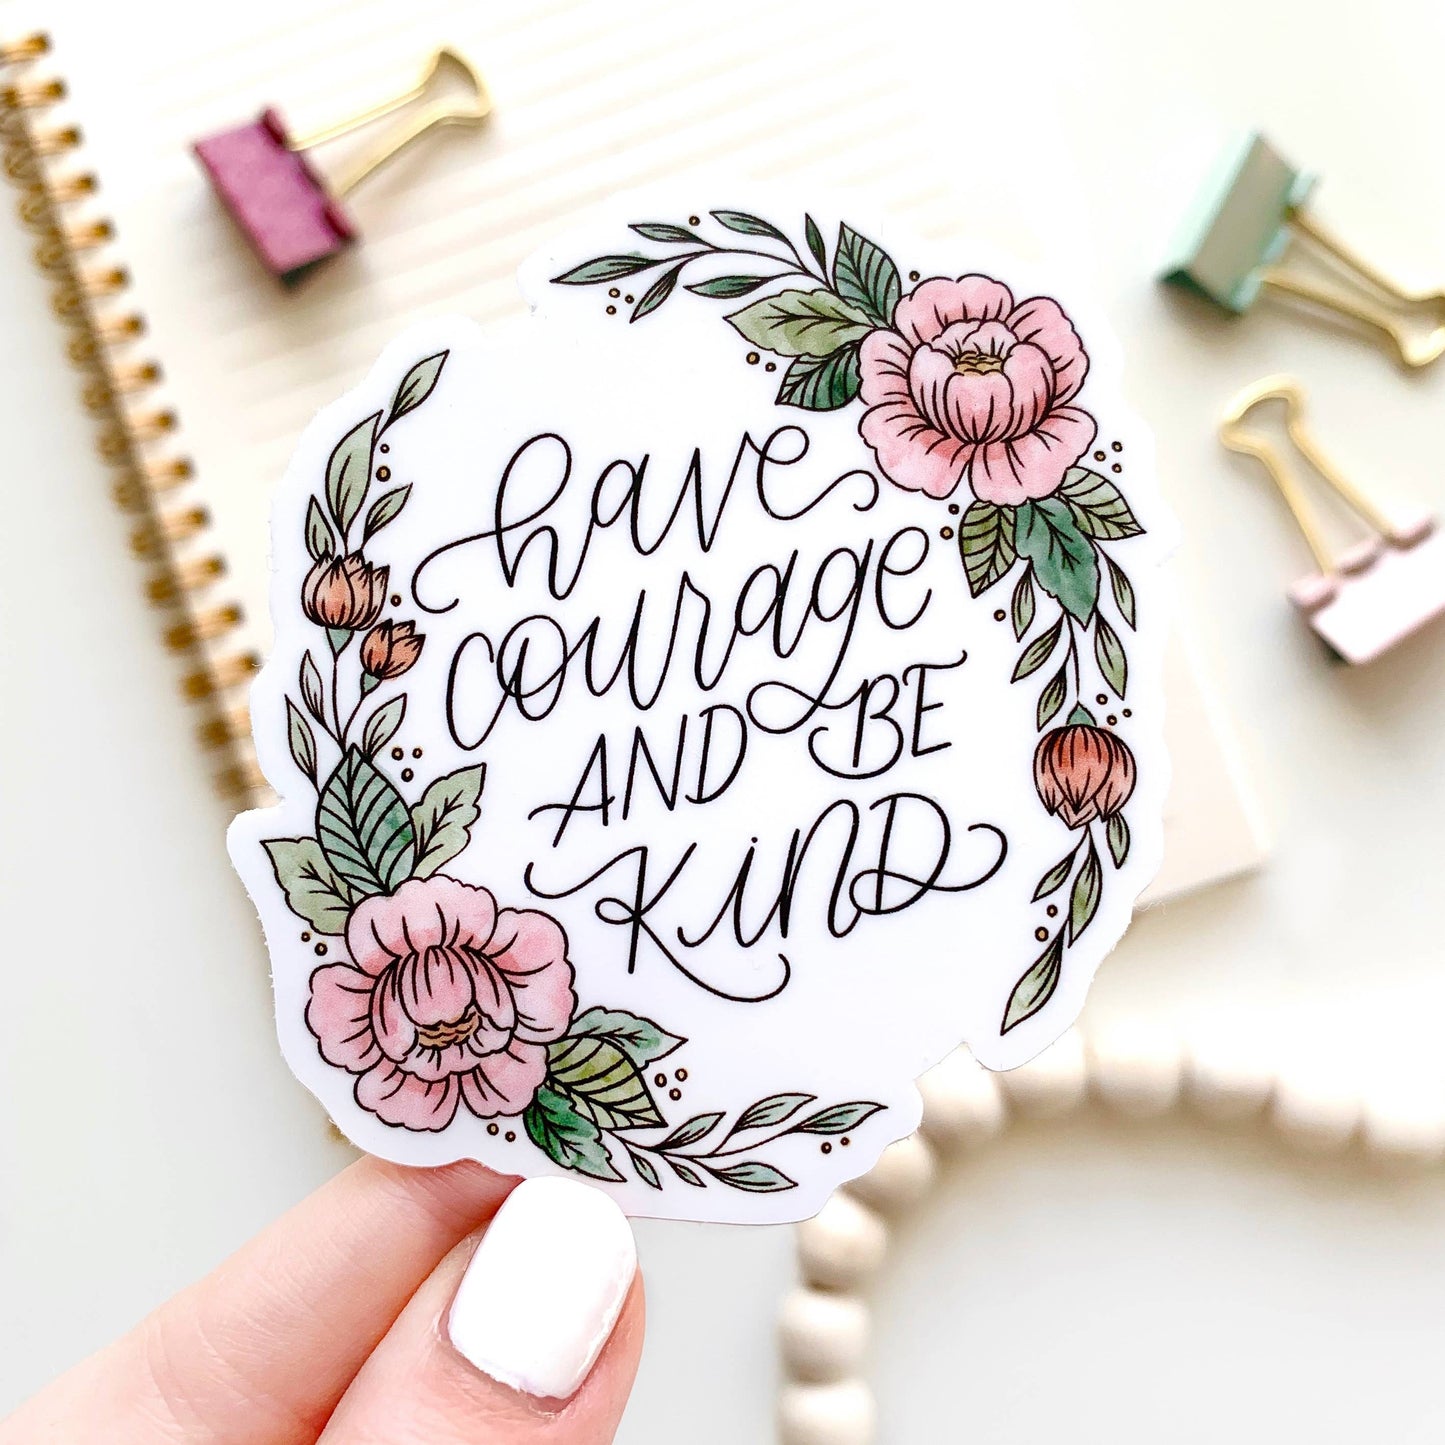 Have Courage and Be Kind Sticker 3x3in.